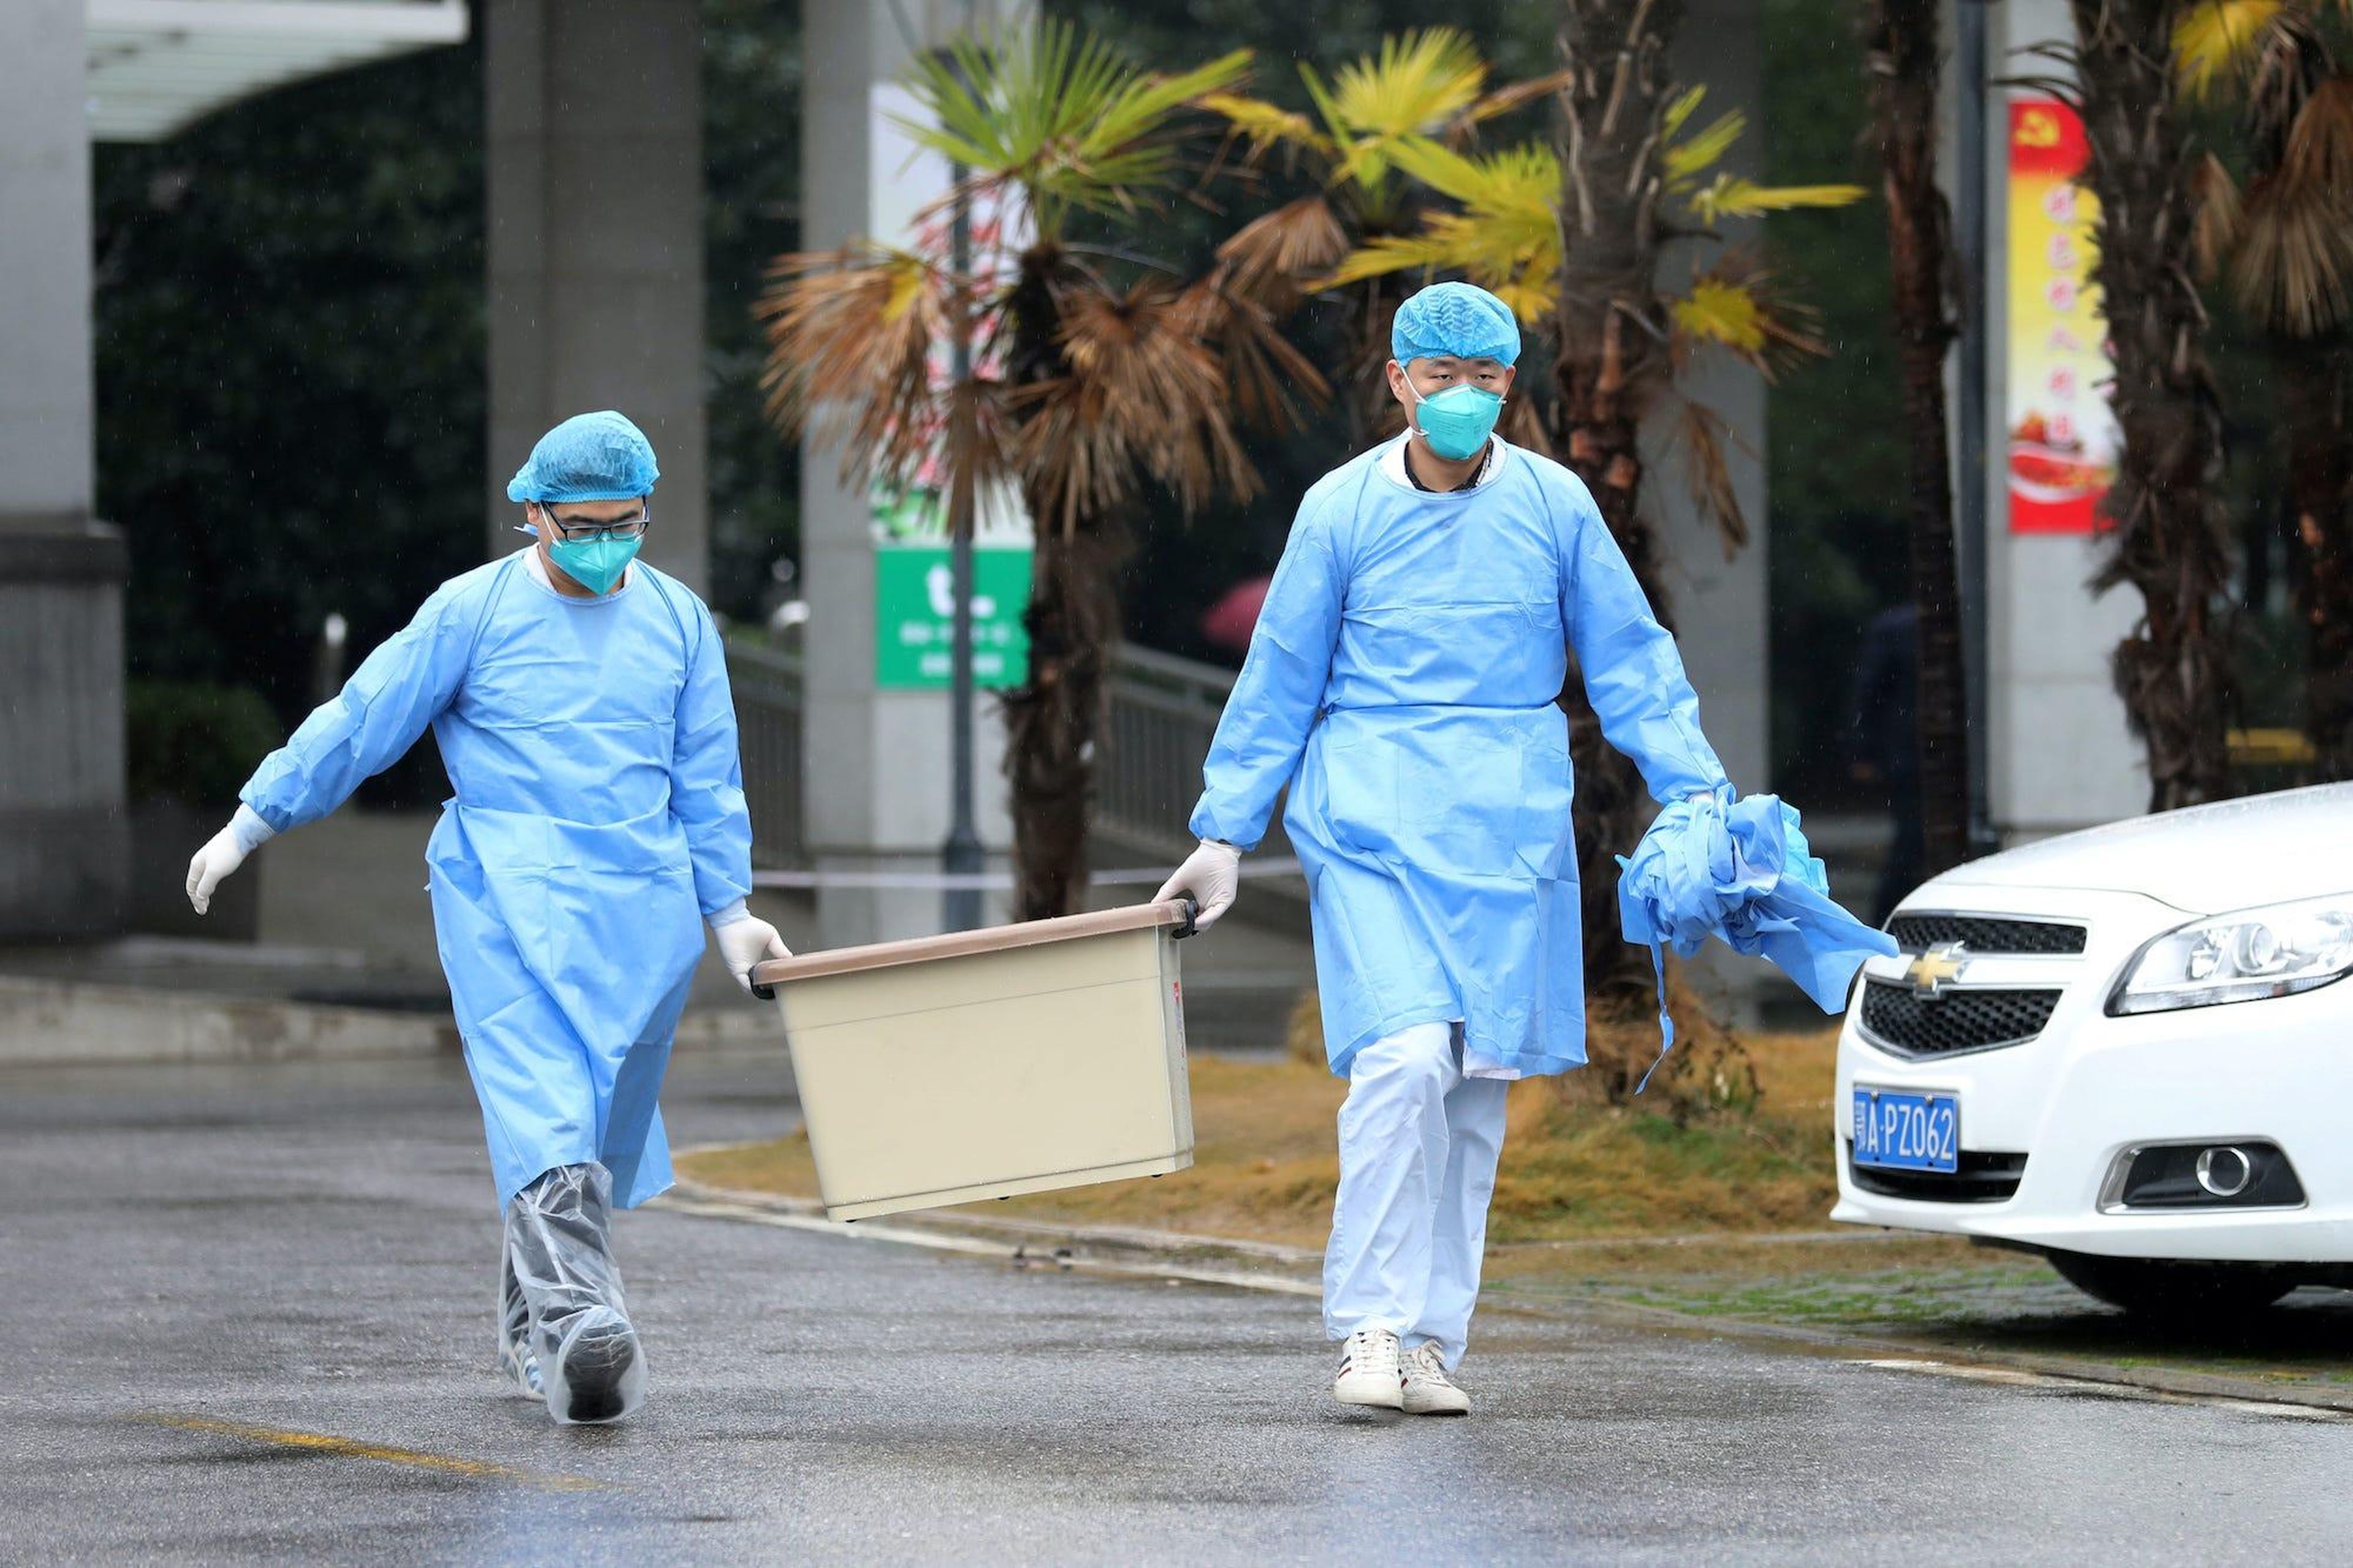 Medical staff carry a box as they walk at the Jinyintan hospital, where the patients with pneumonia caused by the new strain of coronavirus are being treated, in Wuhan Stringer CHINA OUT/REUTERS